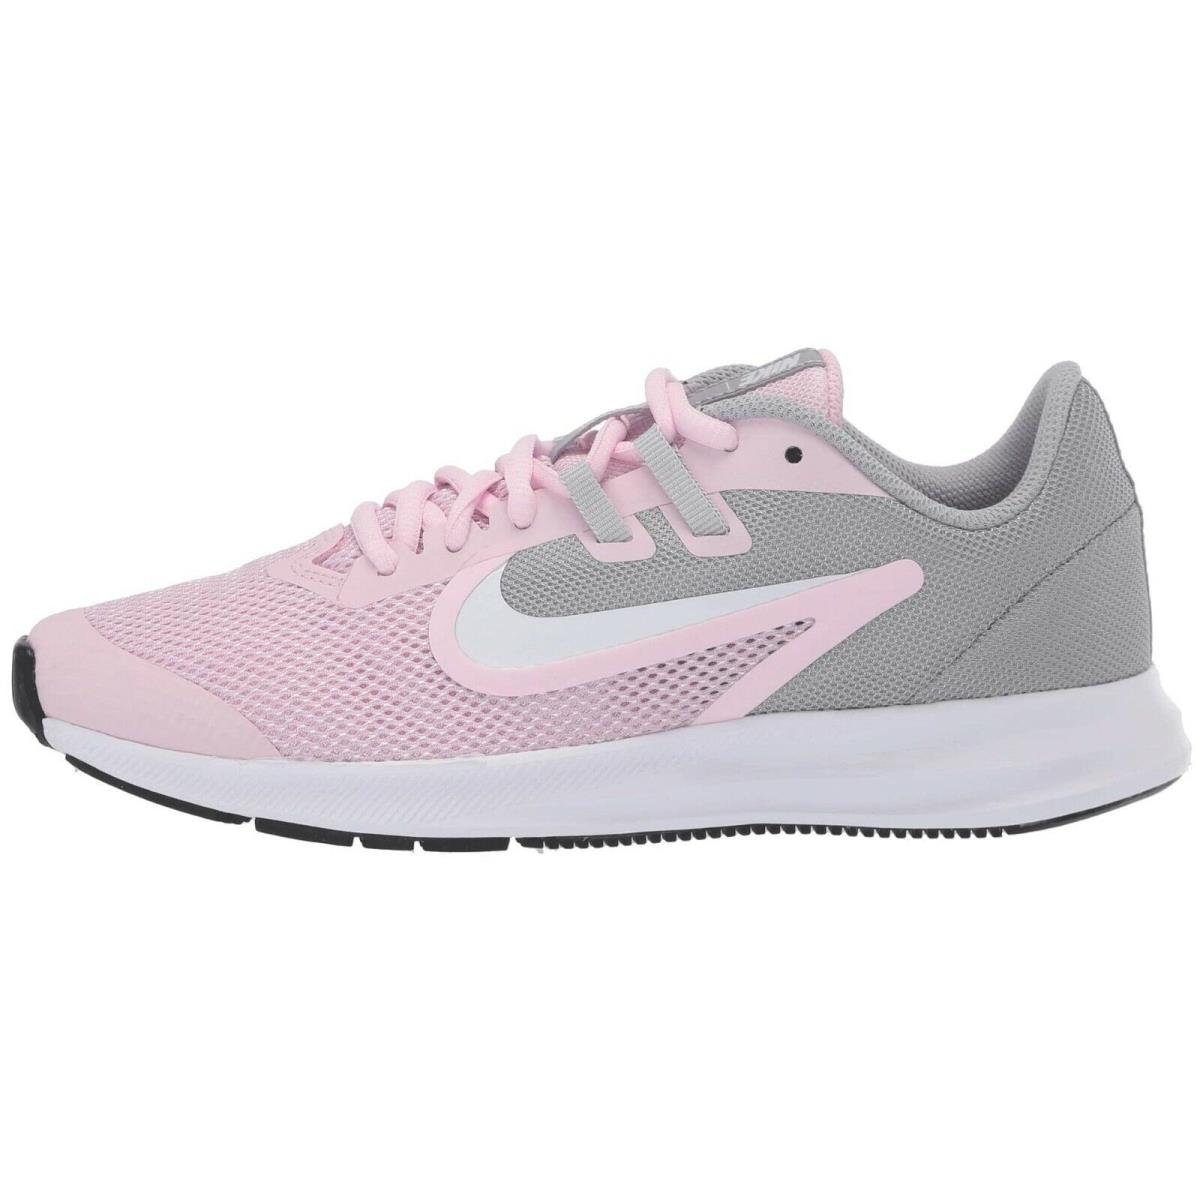 Nike Girls Sneakers Downshifter 9 Pink/white Youth Girls Size 7 M /eur 40 - Pink